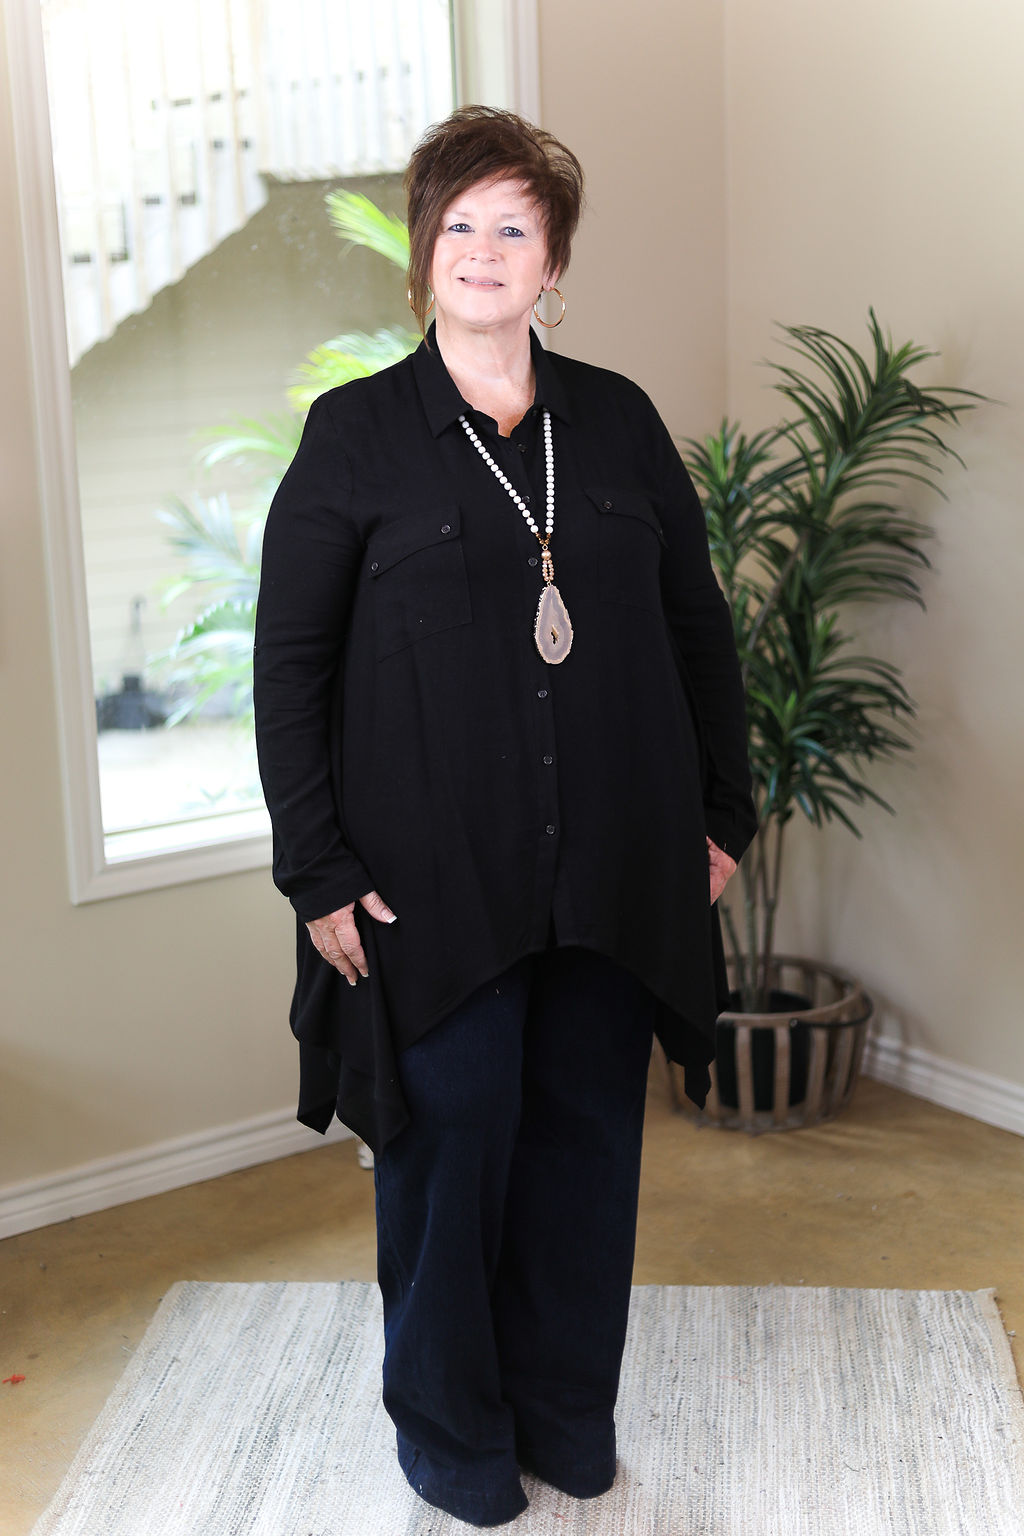 Last Chance Size Small & Medium | Right Impression Linen Button Up Handkerchief Tunic in Black - Giddy Up Glamour Boutique